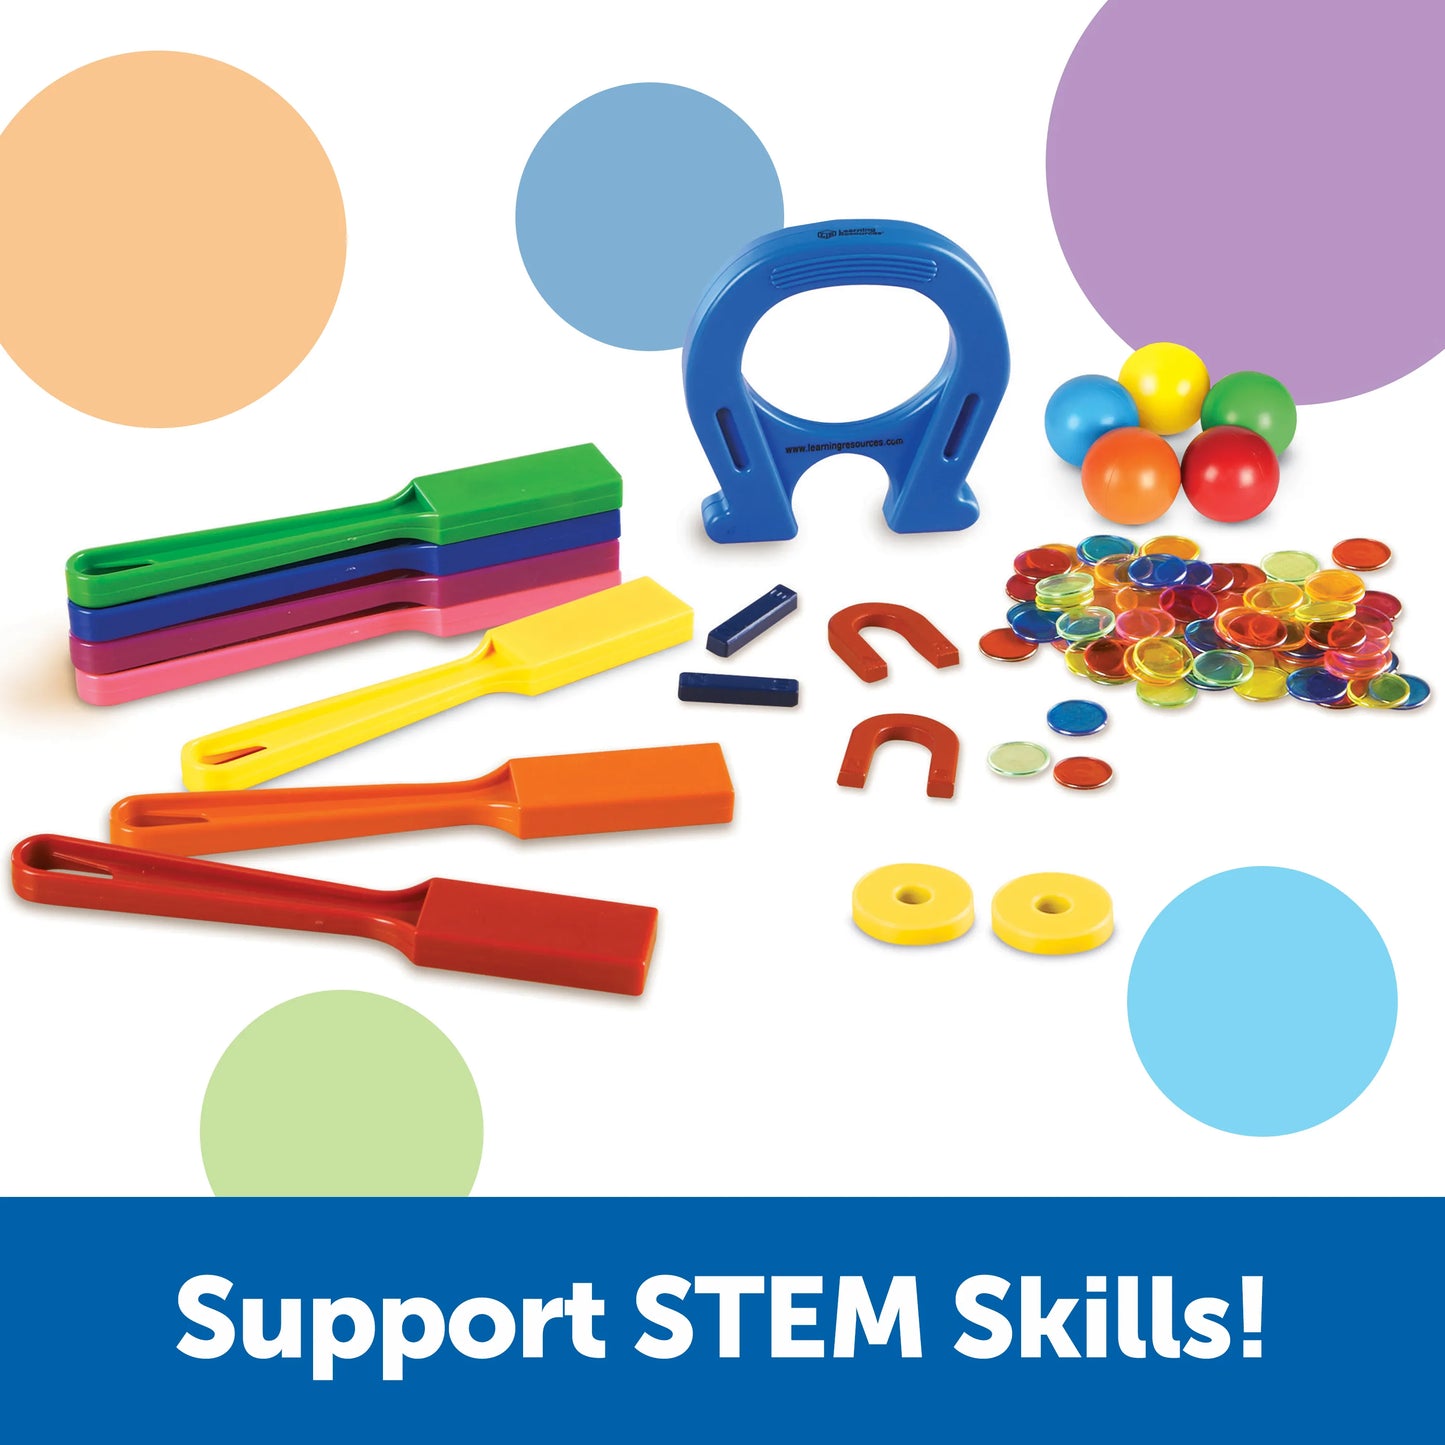 Learning Resources Super Magnet Classroom Lab Kit